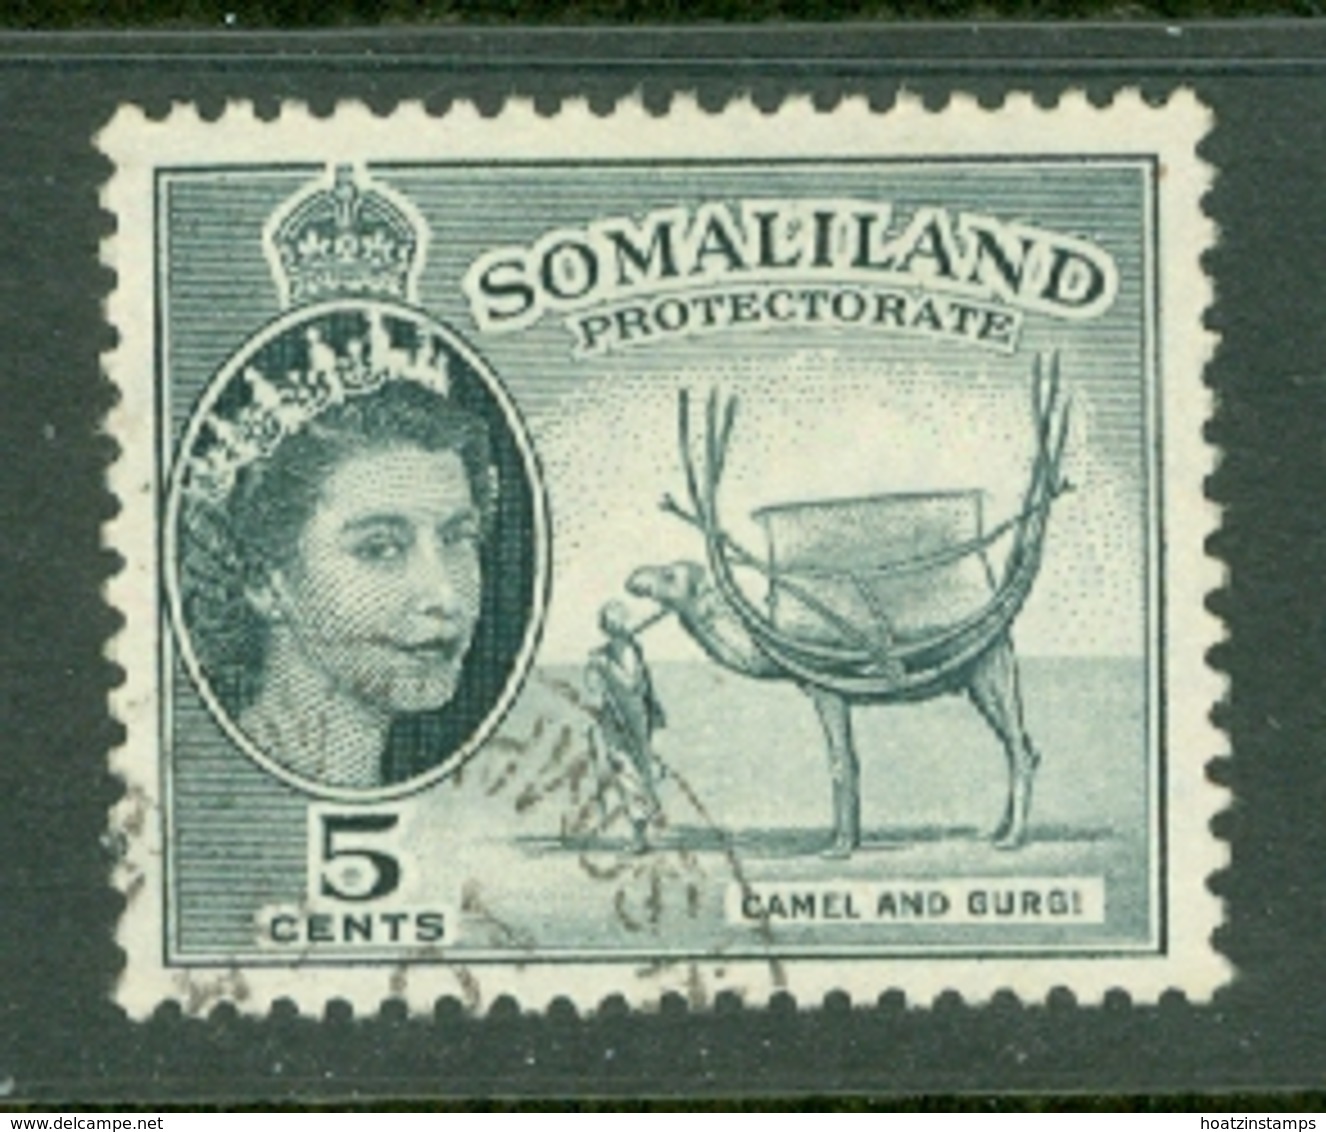 Somaliland Protectorate: 1953/58   QE II - Pictorial    SG137     5c     Used - Somaliland (Protectorate ...-1959)